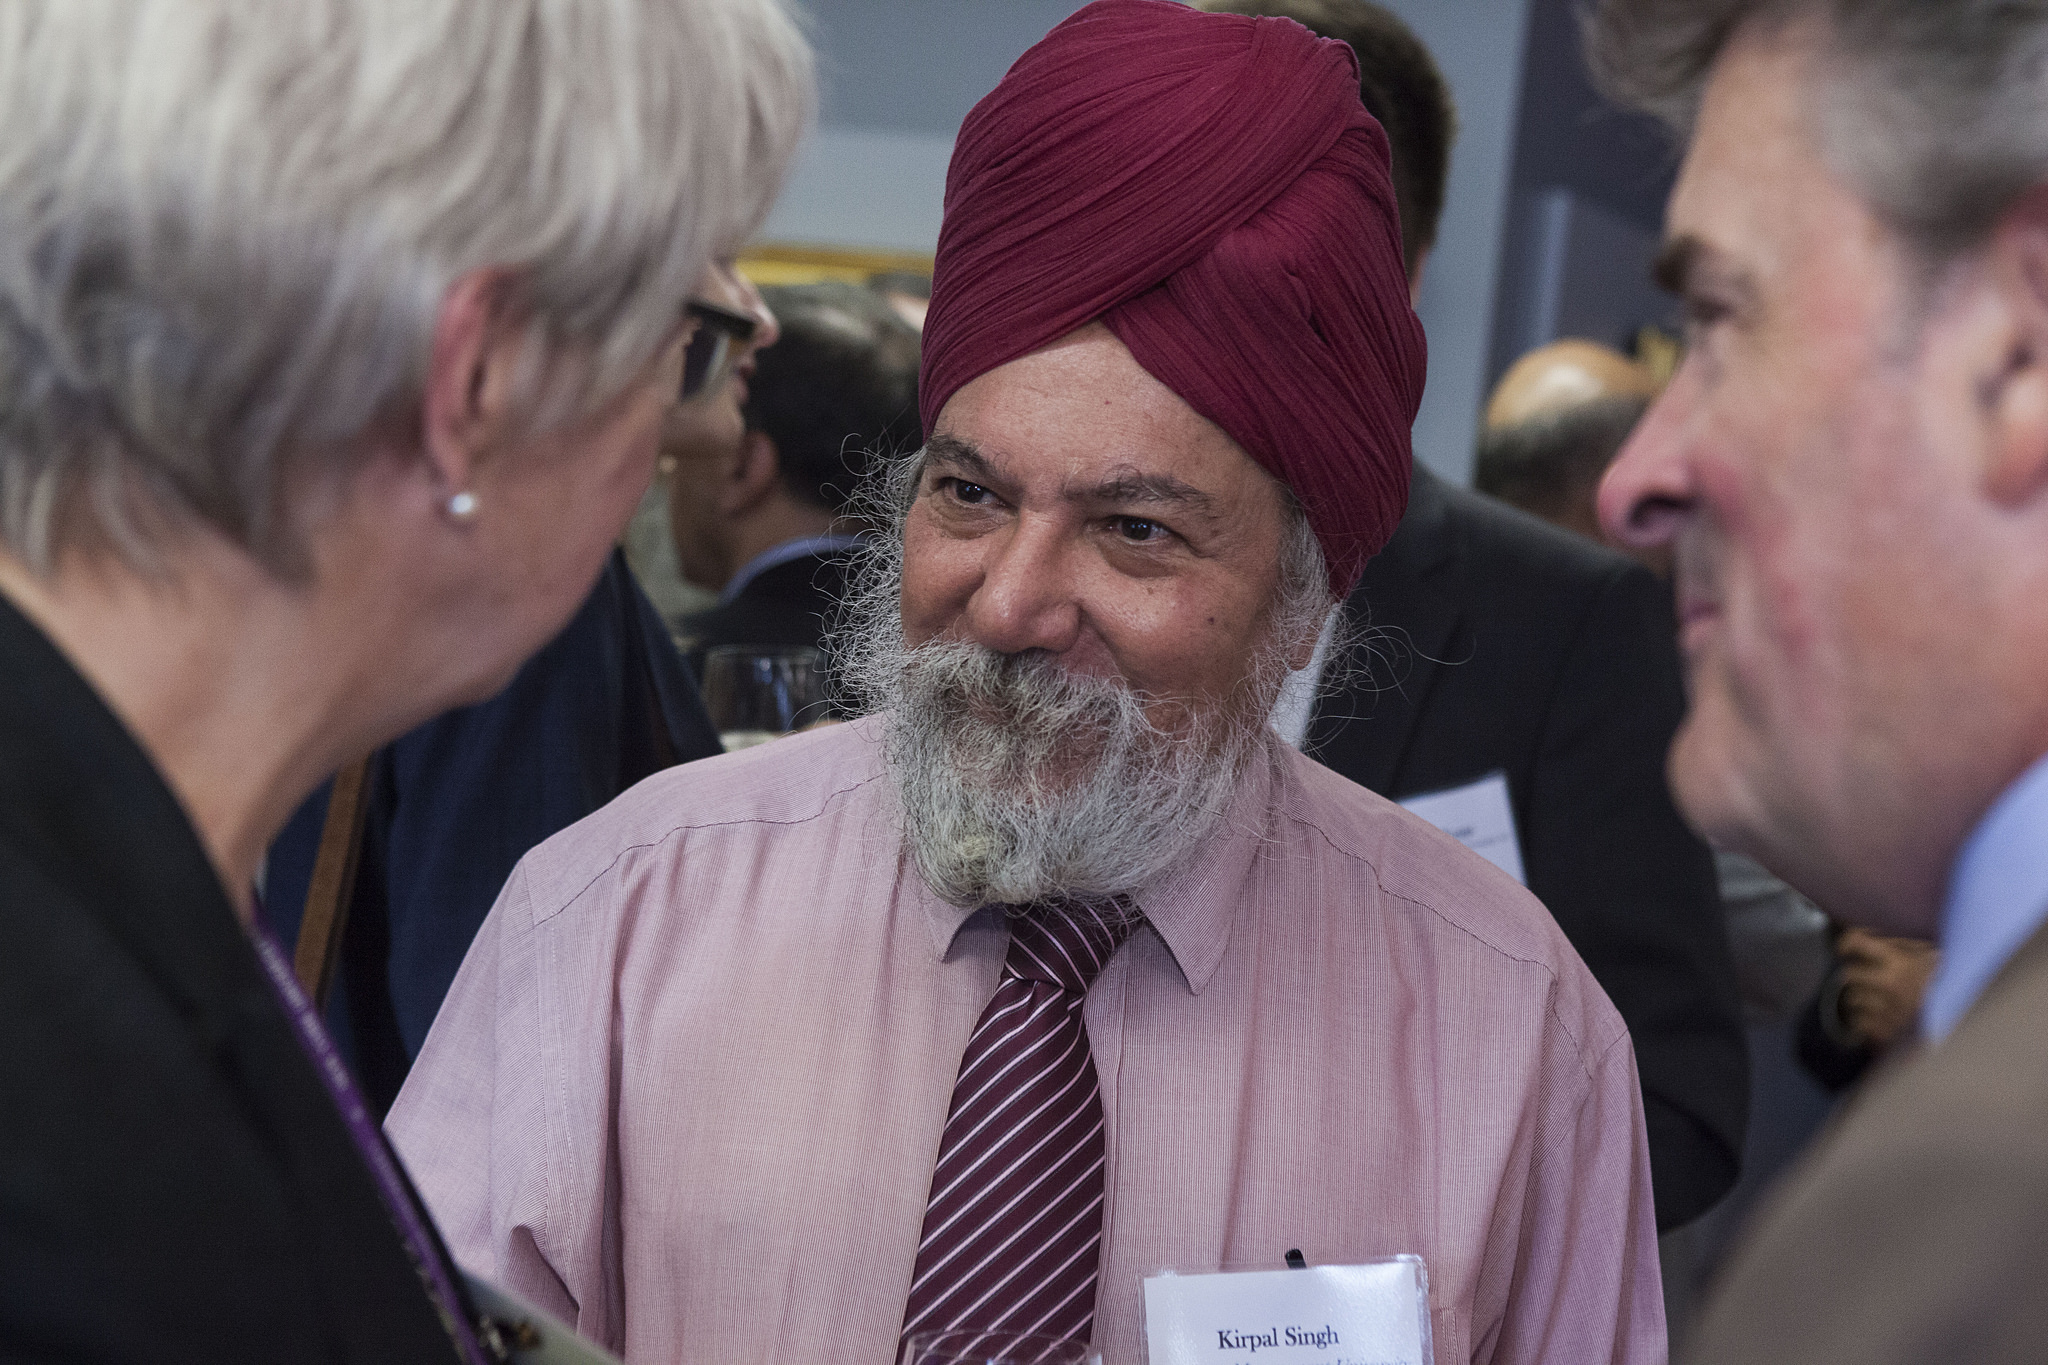 Photo of two men and one woman in a business setting. One man wears a turban.